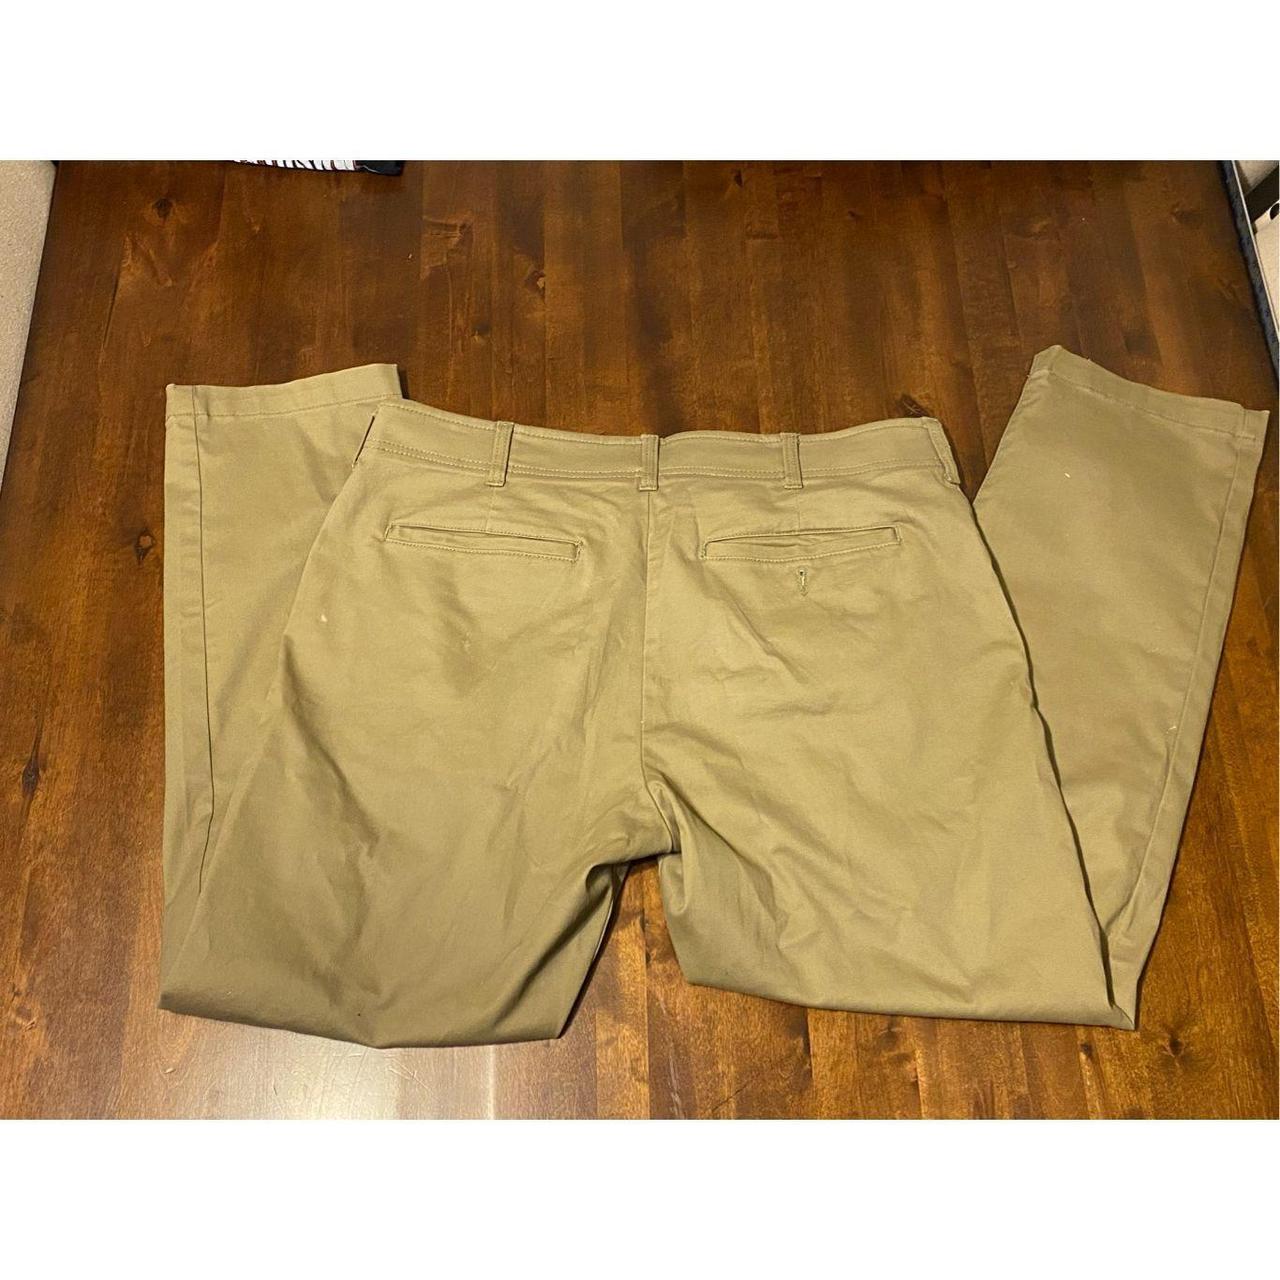 Mens Pants LL BEAN Classic Fit Pleated Khaki Chinos Wrinkle Free Size 36 x  30 | eBay